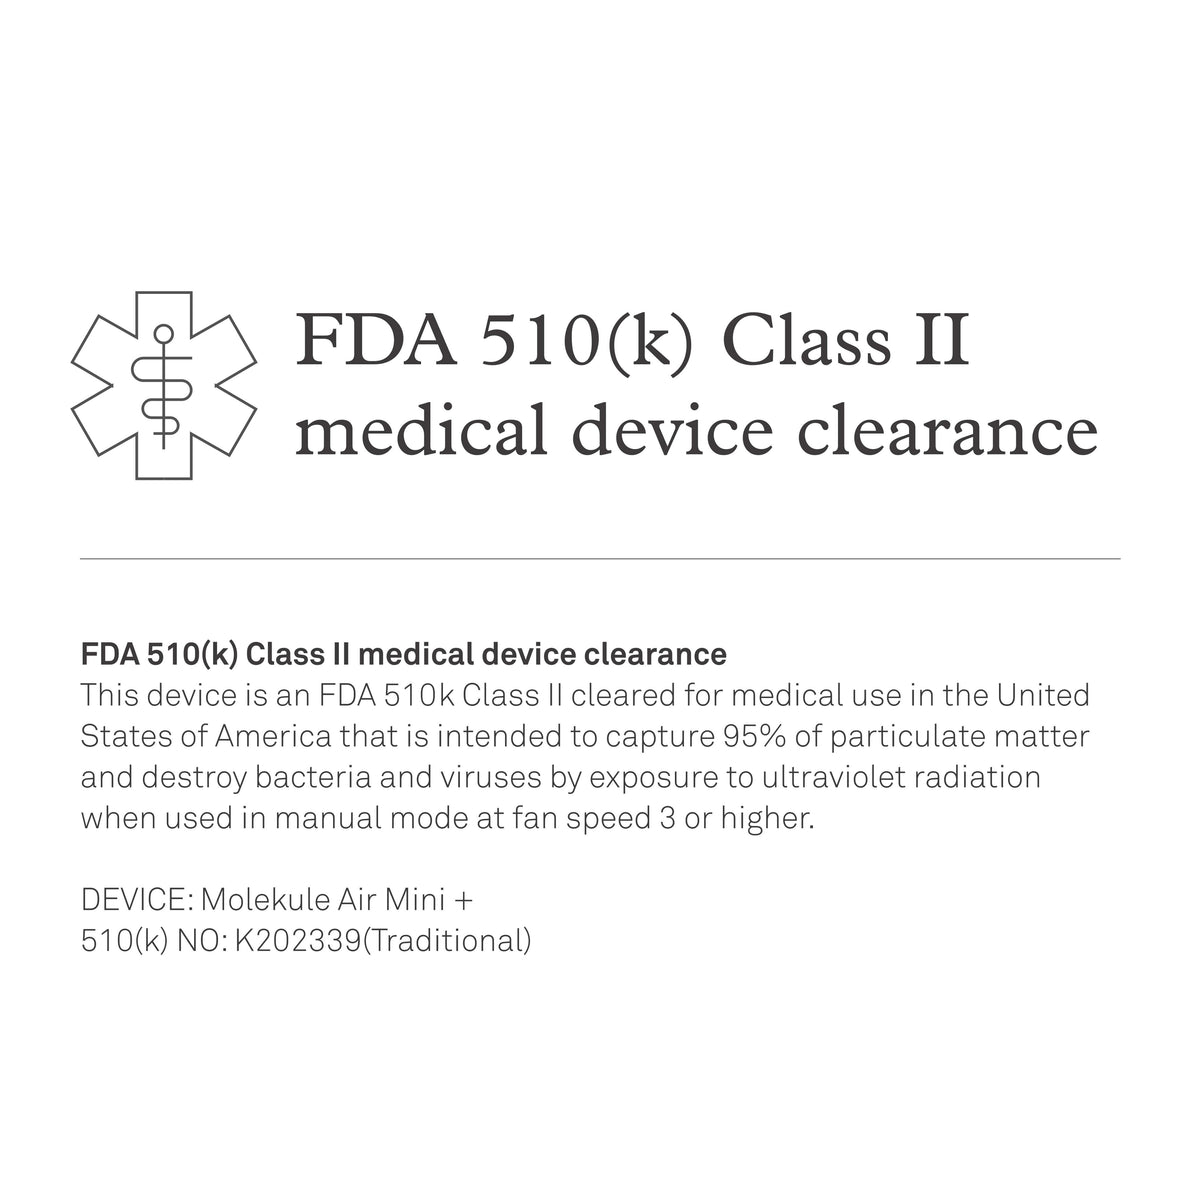 FDA 510(k) Class II medical device clearance. This device is an FDA 510k Class II cleared for medical use in the United States of America that is intended to capture 95% of particulate matter and destroy bacteria and viruses by exposure to ultraviolet radiation when used in manual mode at fan speed 3 or higher. DEVICE: Molekule Air Mini +. 510(k) NO: K202339(Traditional)